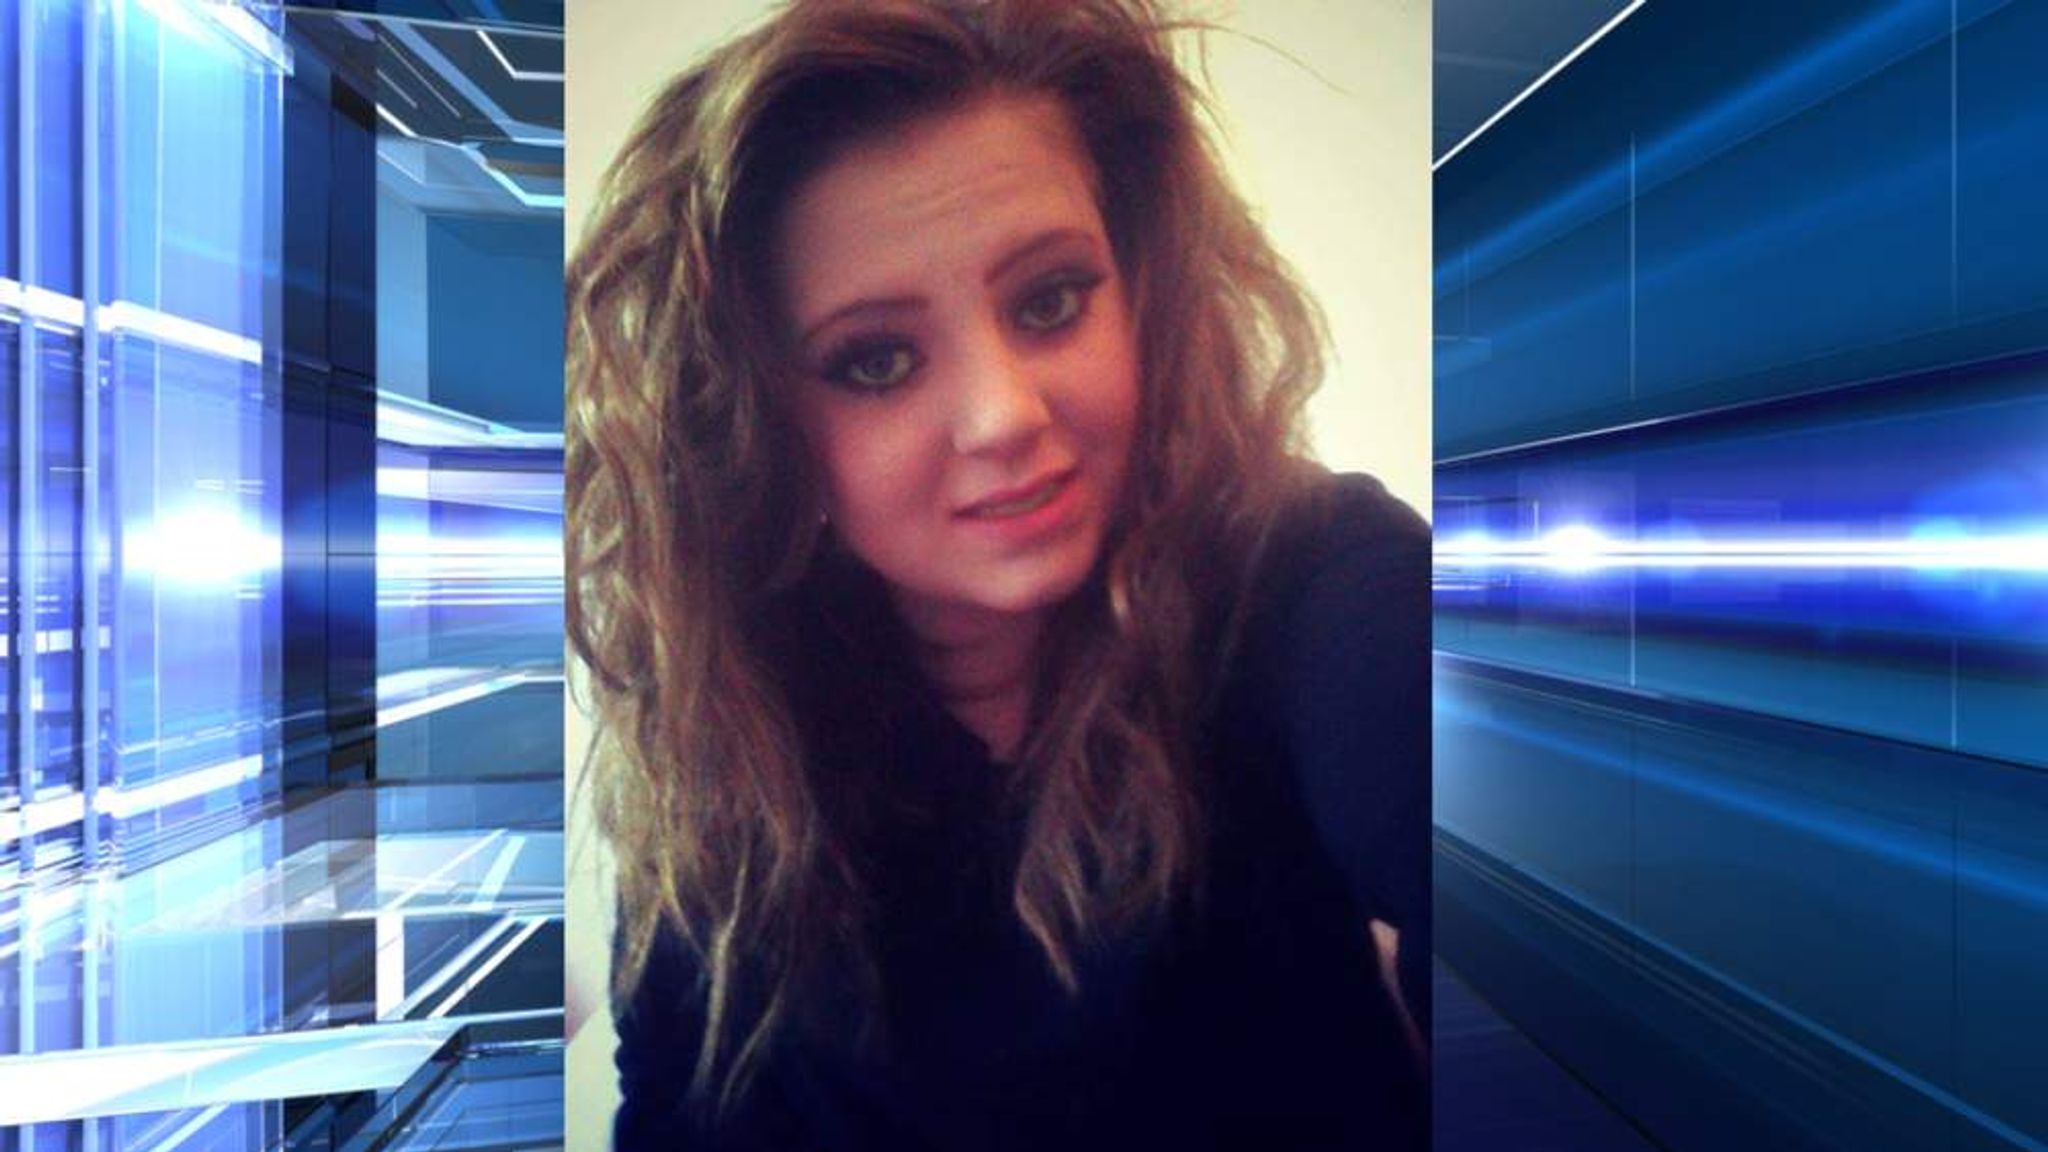 Hannah Smith killed herself because of online abuse, her father has said. 